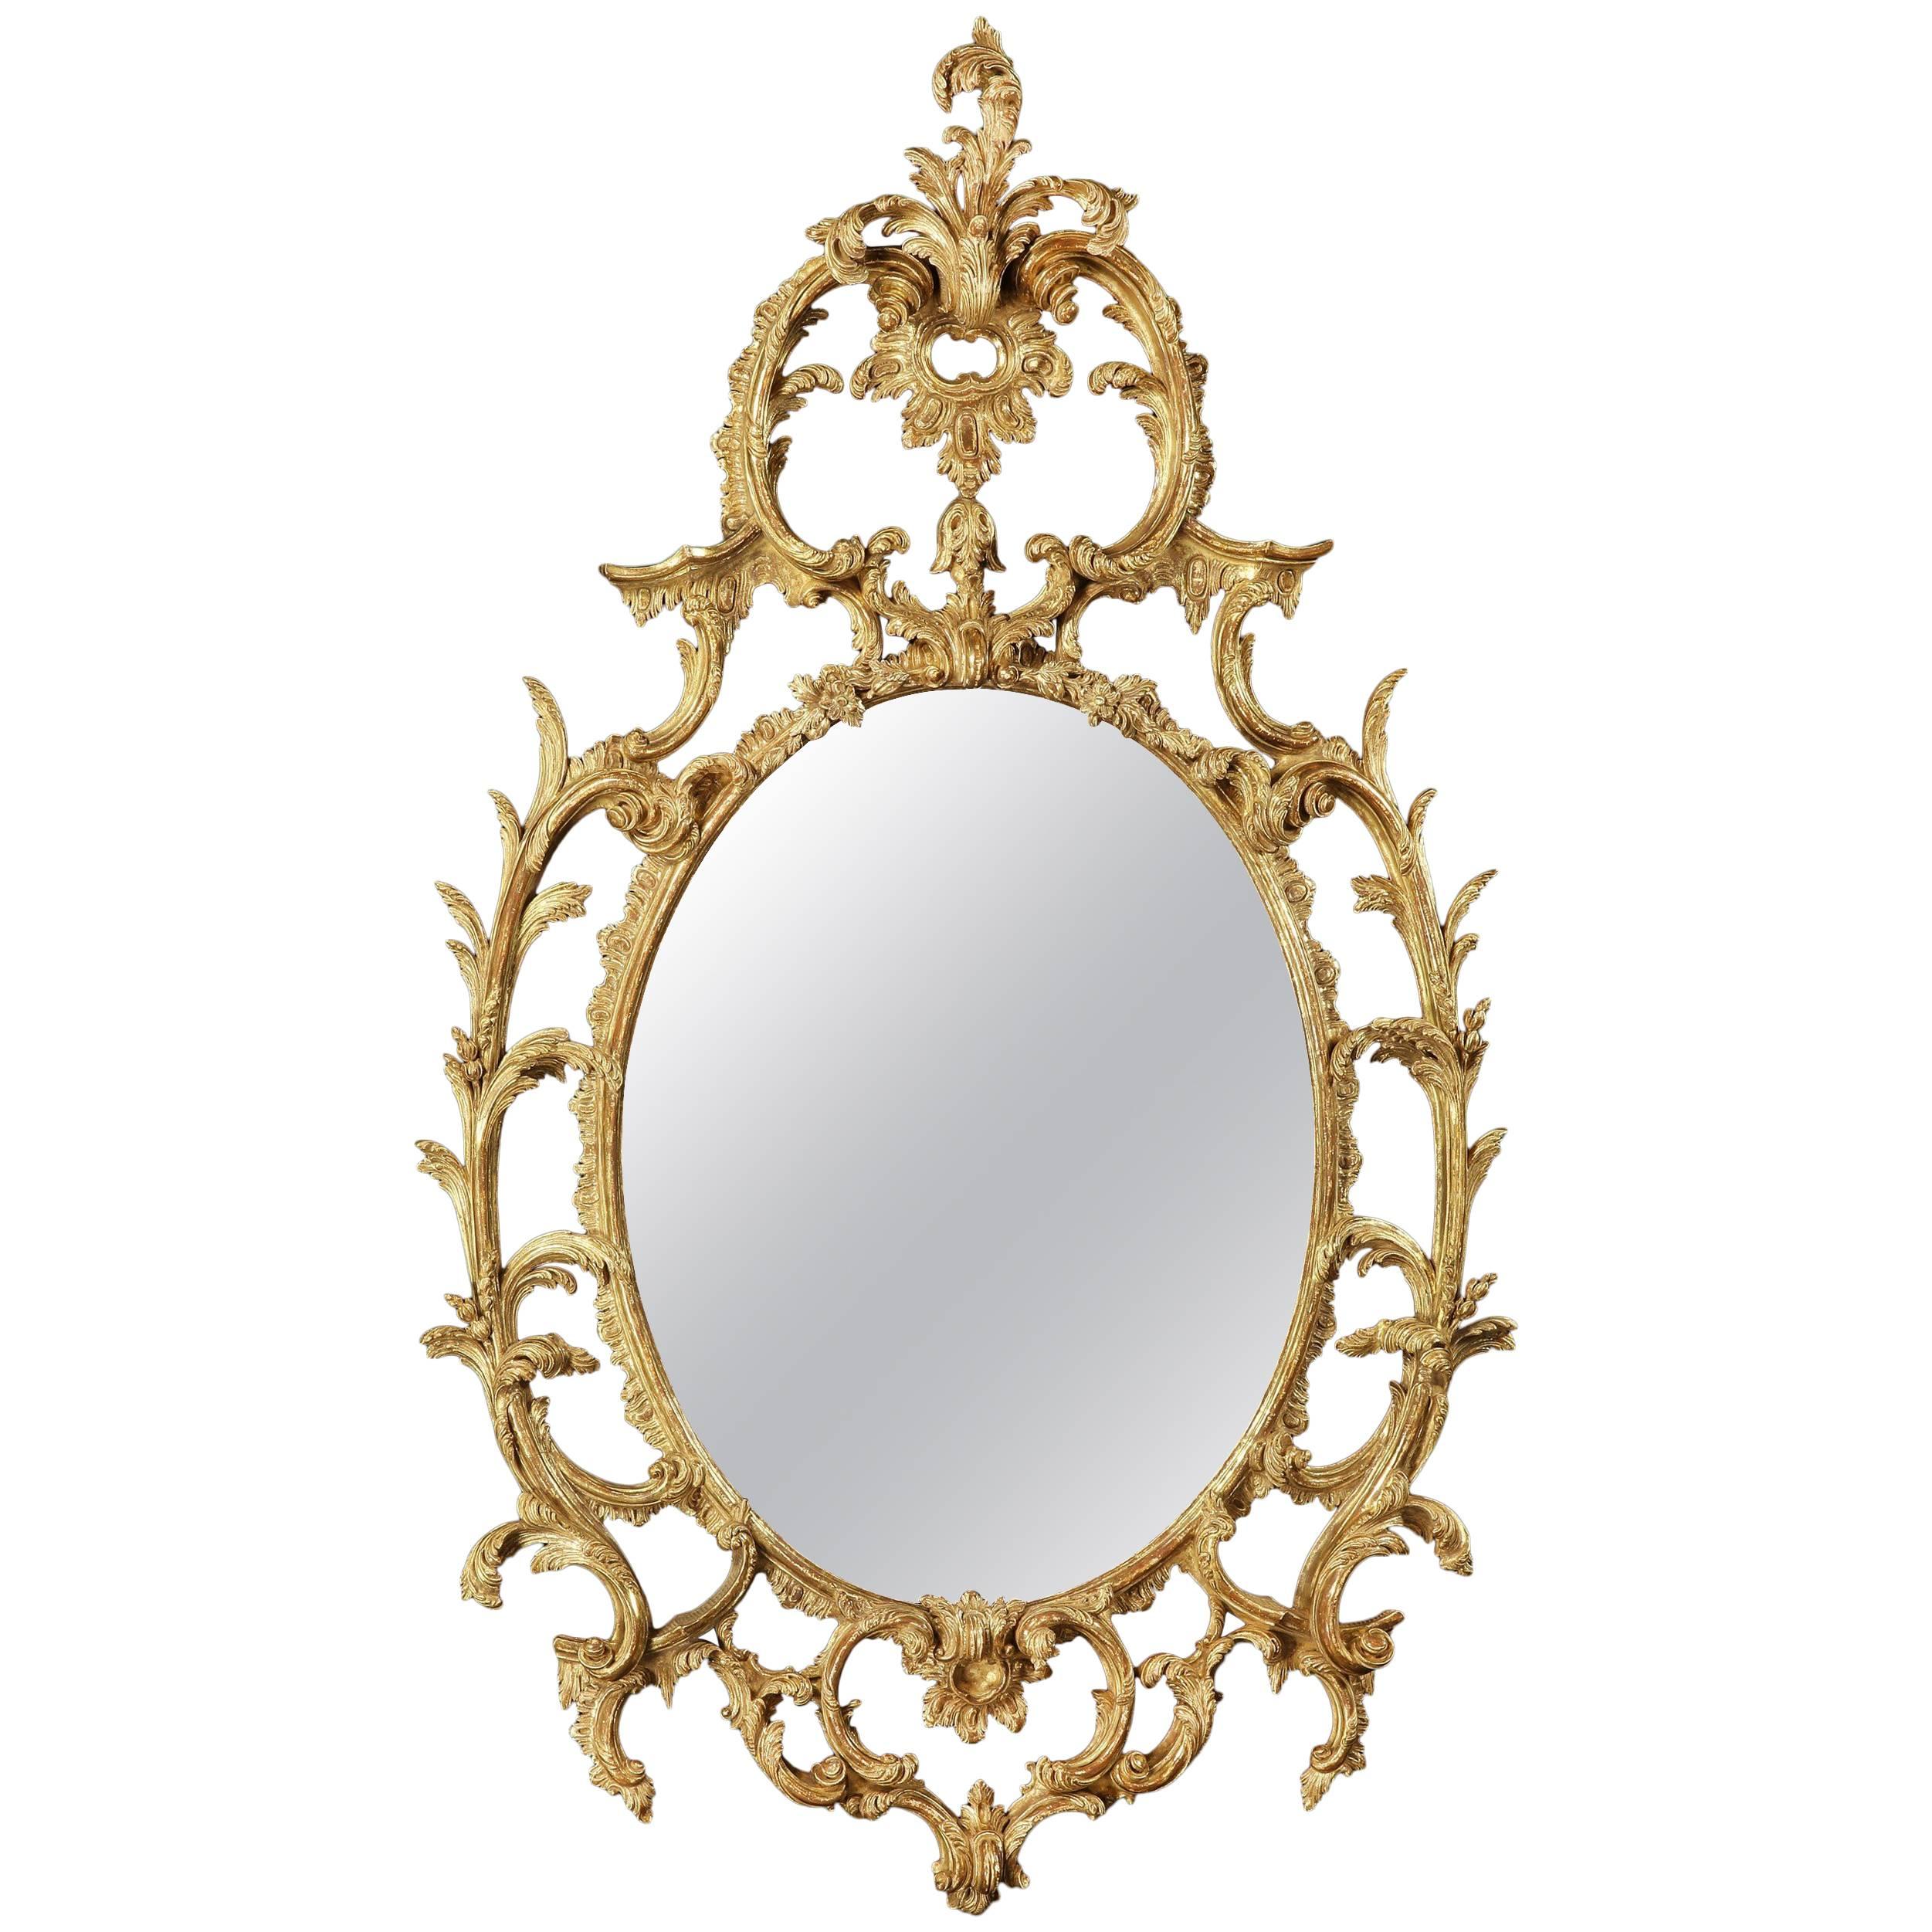 George III Giltwood Oval Mirror to a Design by Thomas Chippendale For Sale